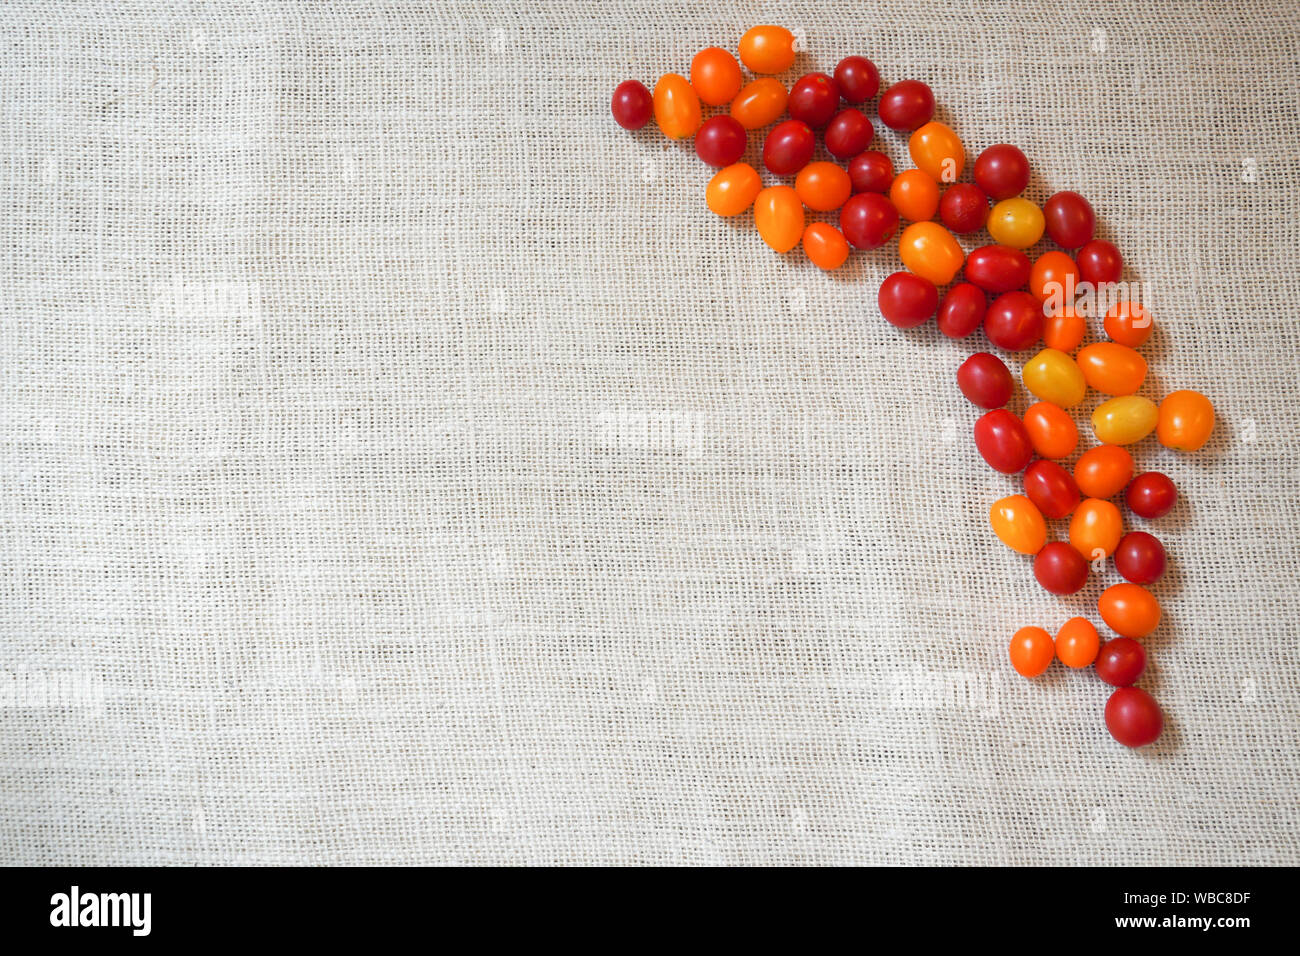 A variety of colors of cherry tomatoes on burlap Stock Photo